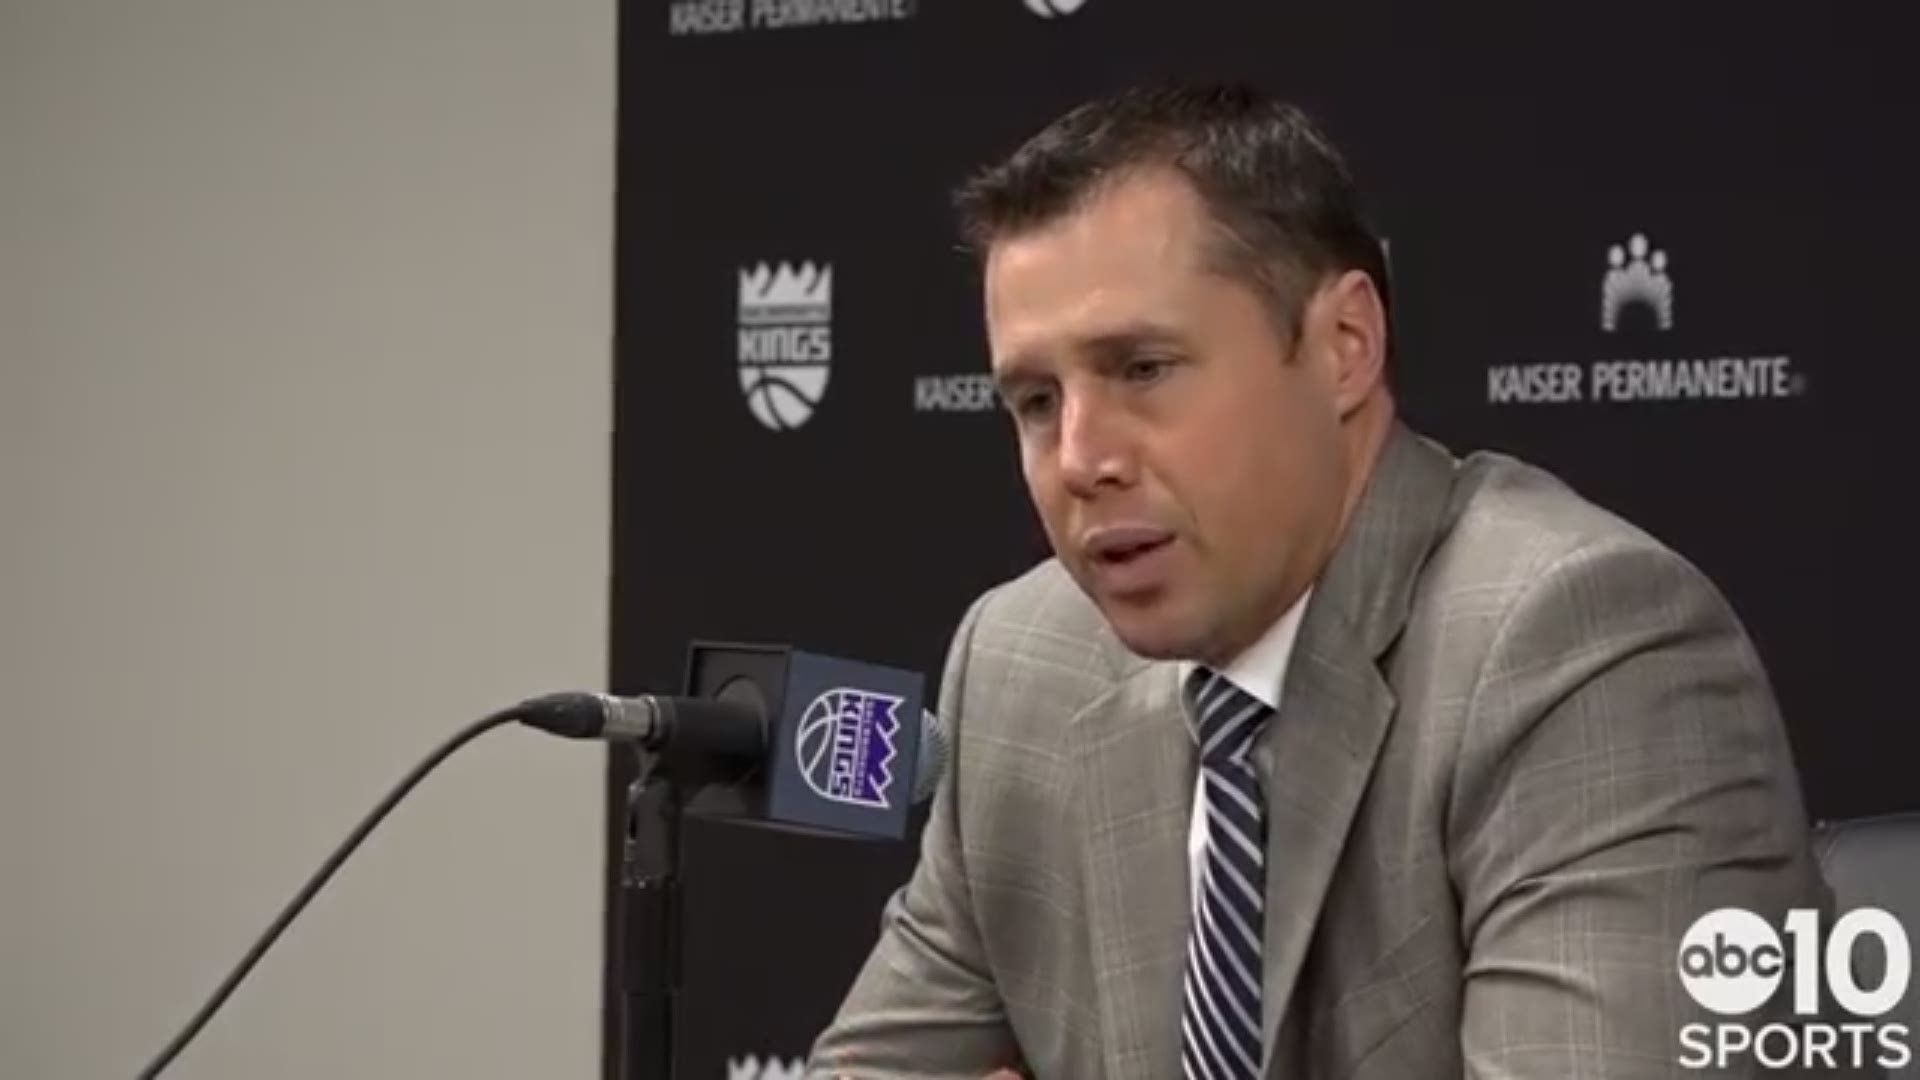 Kings head coach Dave Joerger talks about his team's disappointing home finale loss to the Pelicans, how the Pelicans have played them tough in every game this season and the struggles and similarities in the recent weeks of losses.